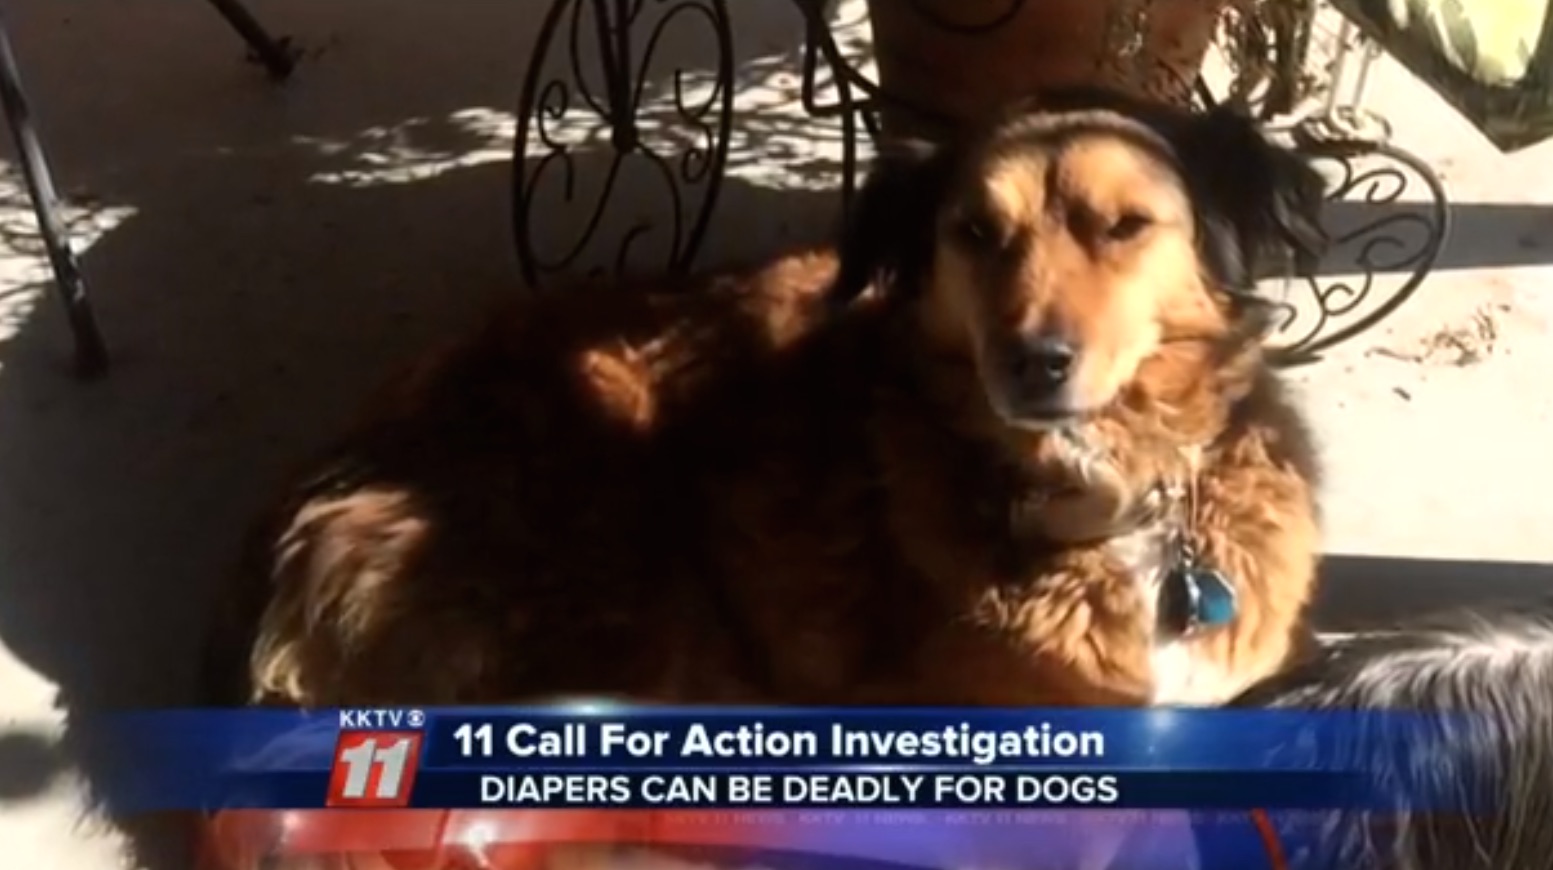 Ginger the dog died  after eating part of a baby's diaper.